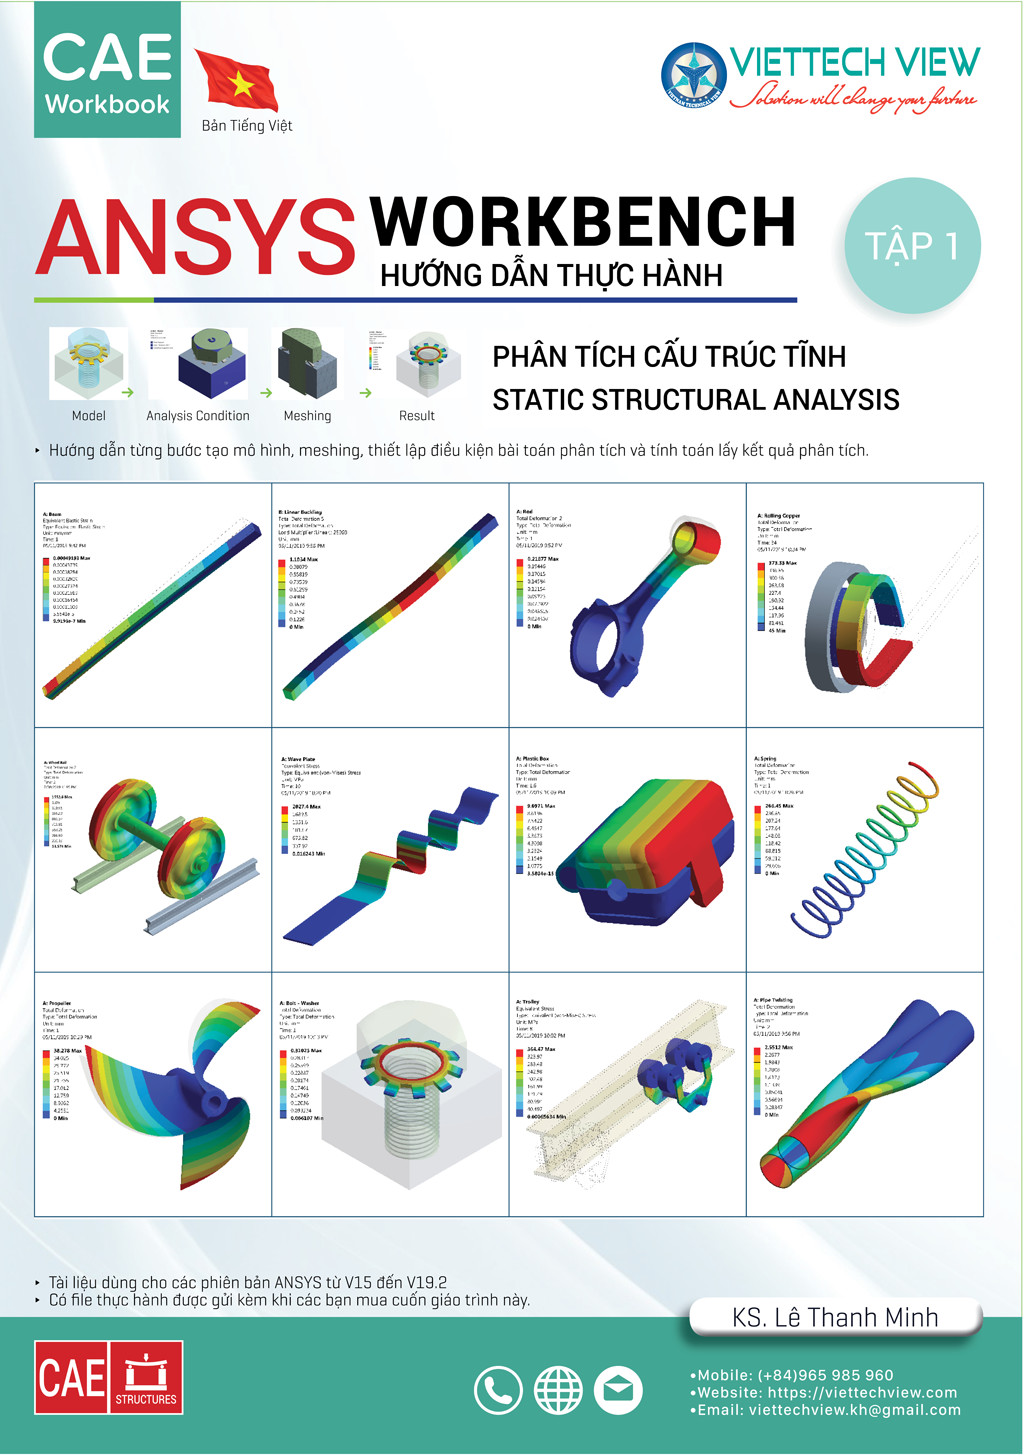 ANSYS Workbench_Sructural analysis exercises_Full cover_-08-11-2019-14-00-12.jpg